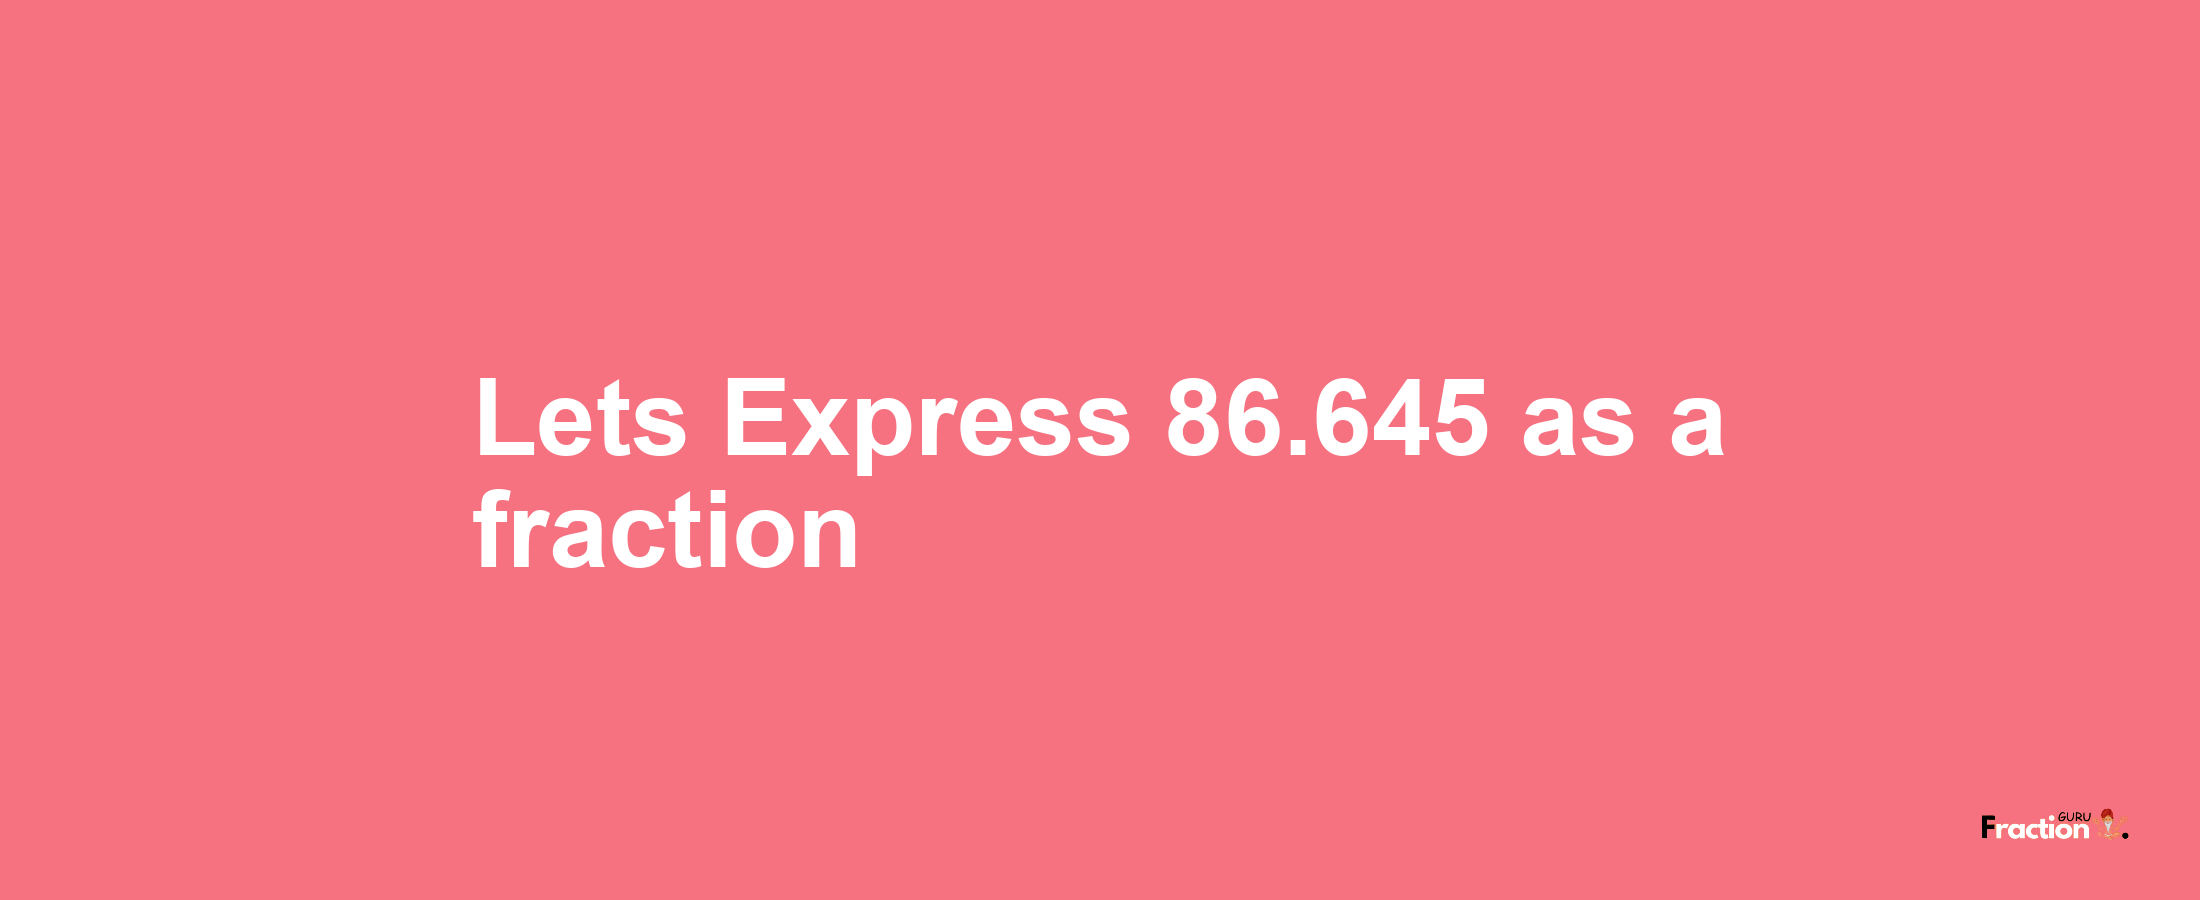 Lets Express 86.645 as afraction